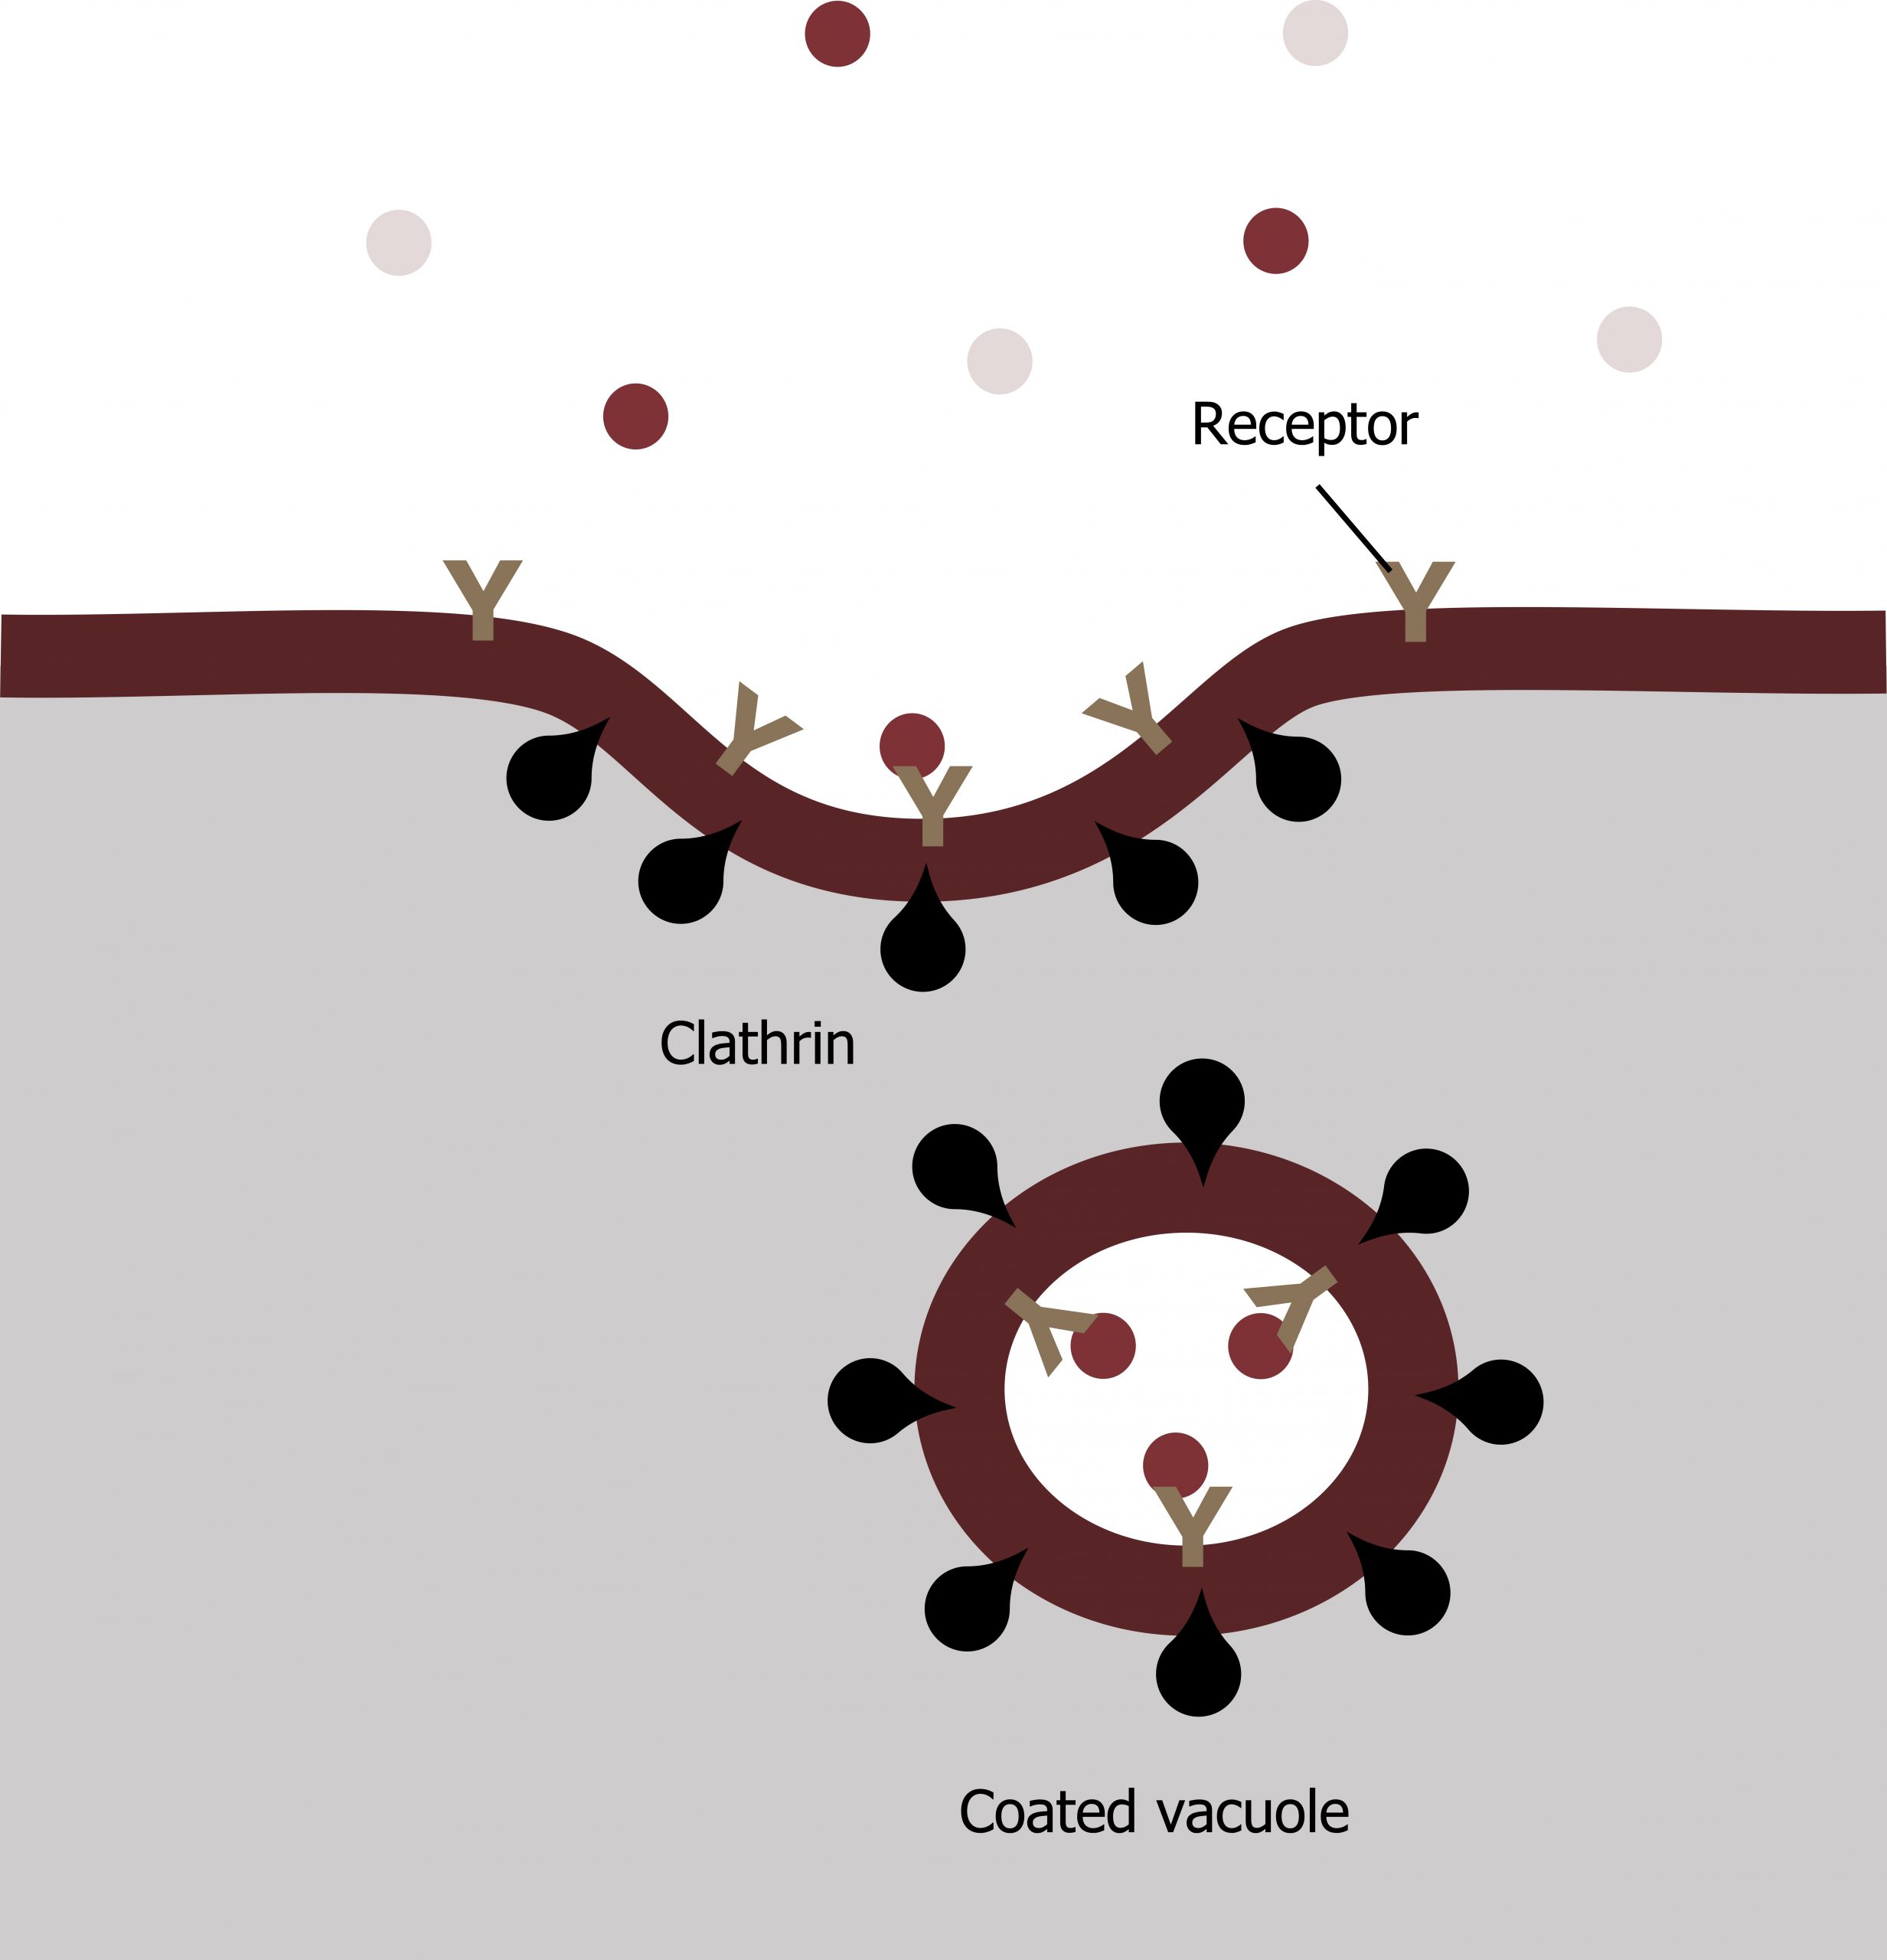 Particles bind to their receptors on the plasma membrane. Clathrin binds on the cytoplasmic side. The receptors and particles are engulfed by the plasma membrane and transported into the cell in a coated vacuole.